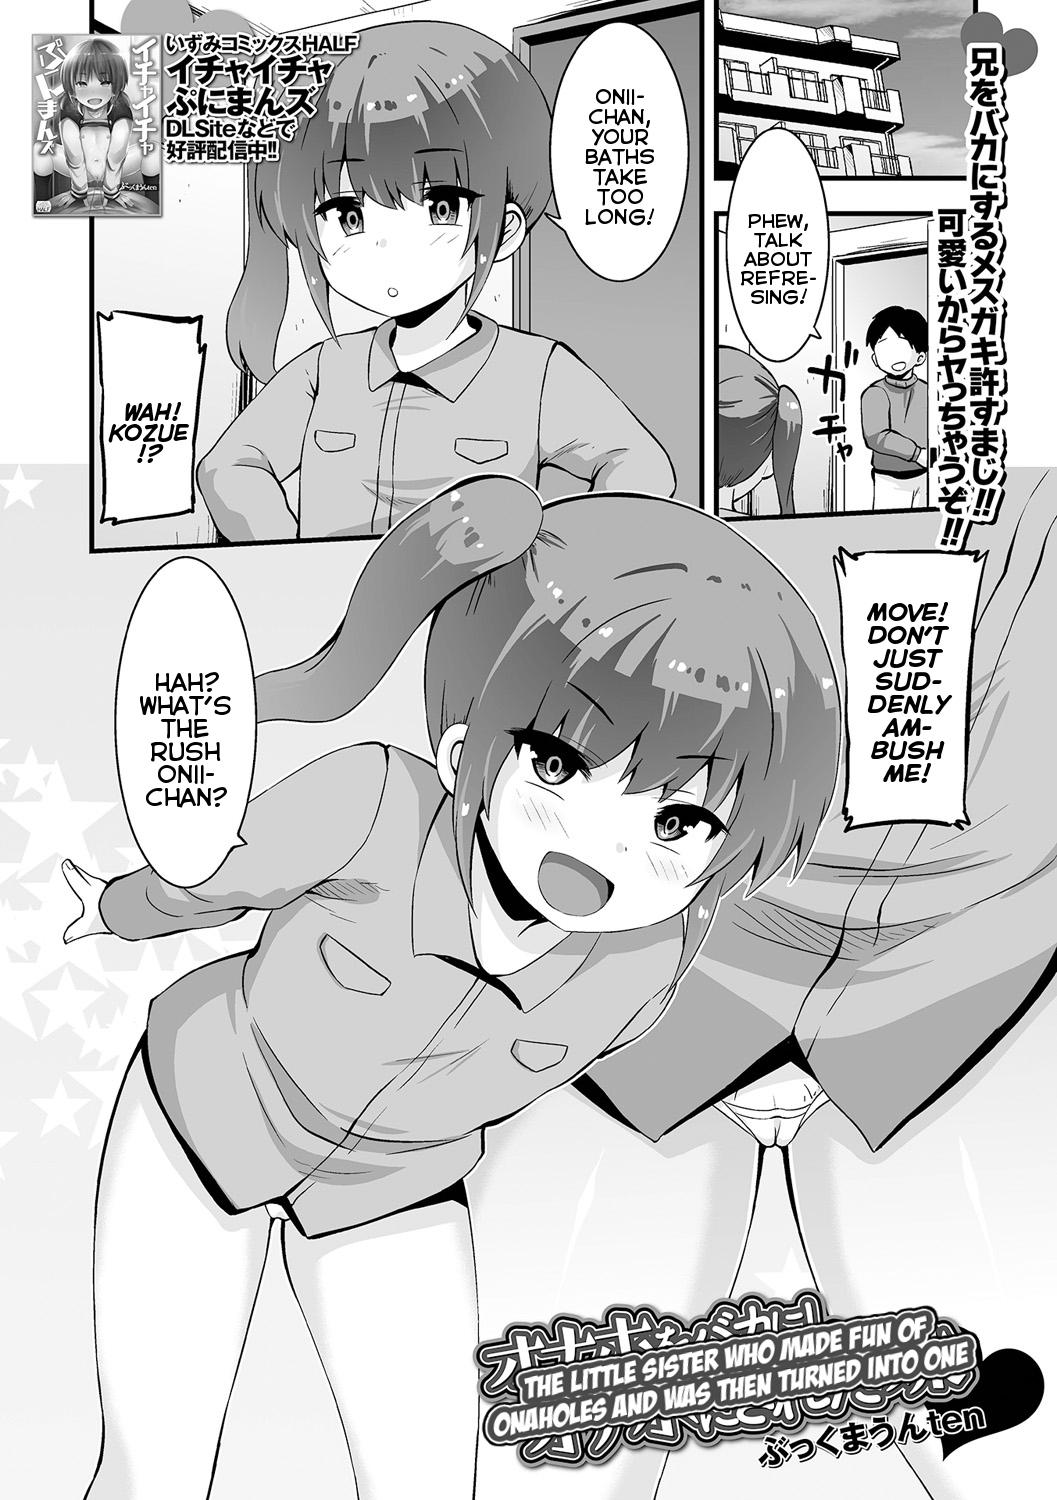 Slave Onaho o Baka ni shi Onaho ni Sareta Imouto | The Little Sister Who Made Fun Of Onaholes and Was Then Turned Into One (COMIC Mate Legend Vol. 50 2023-04 Nudity - Page 1